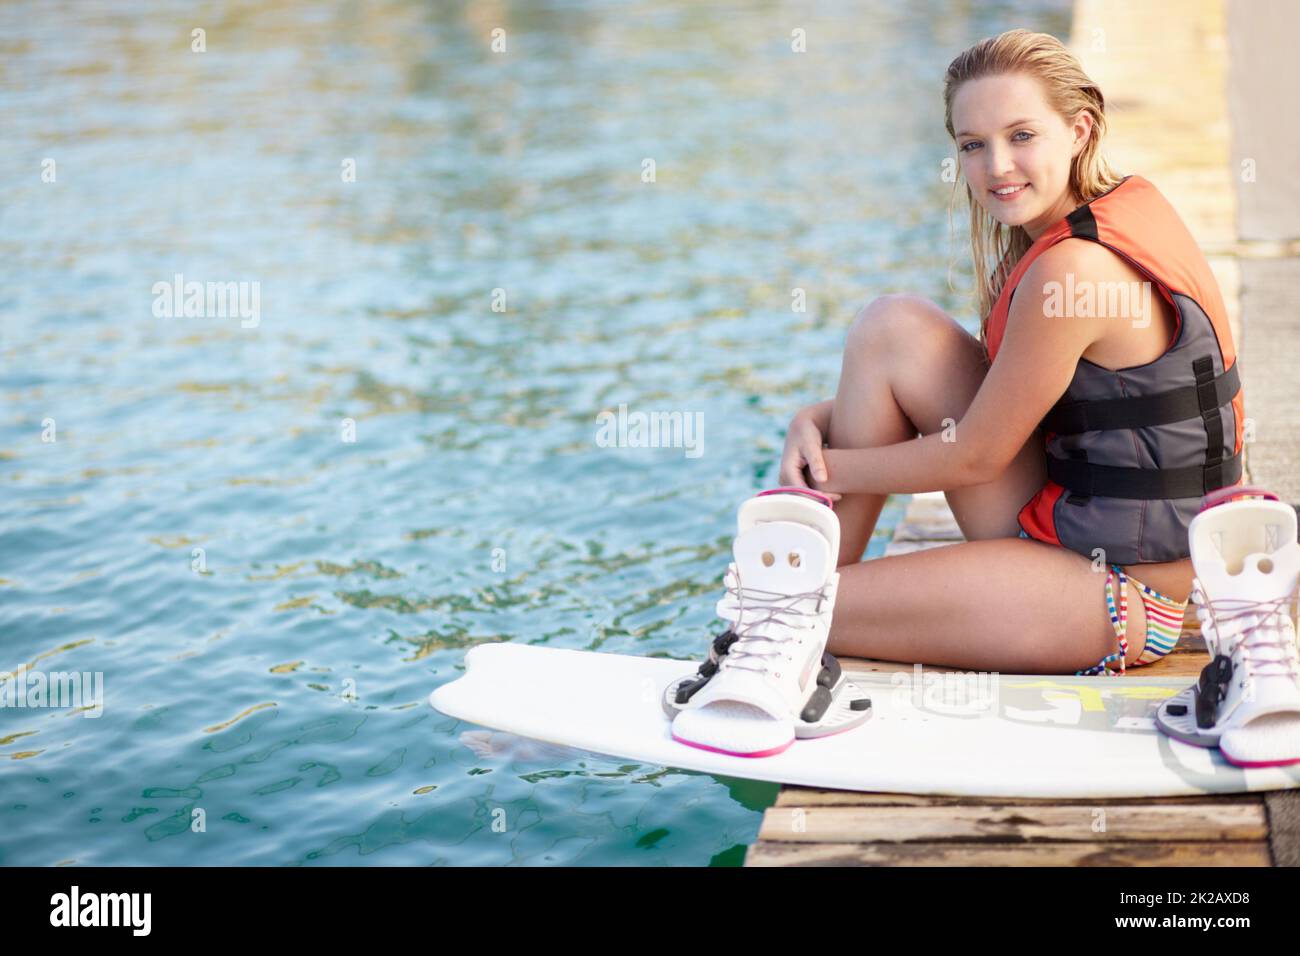 Portrait of a pretty young girl sitting on a jetty next to a wakeboard. Portrait of a pretty young girl sitting on a jetty next to a wakeboard. Stock Photo